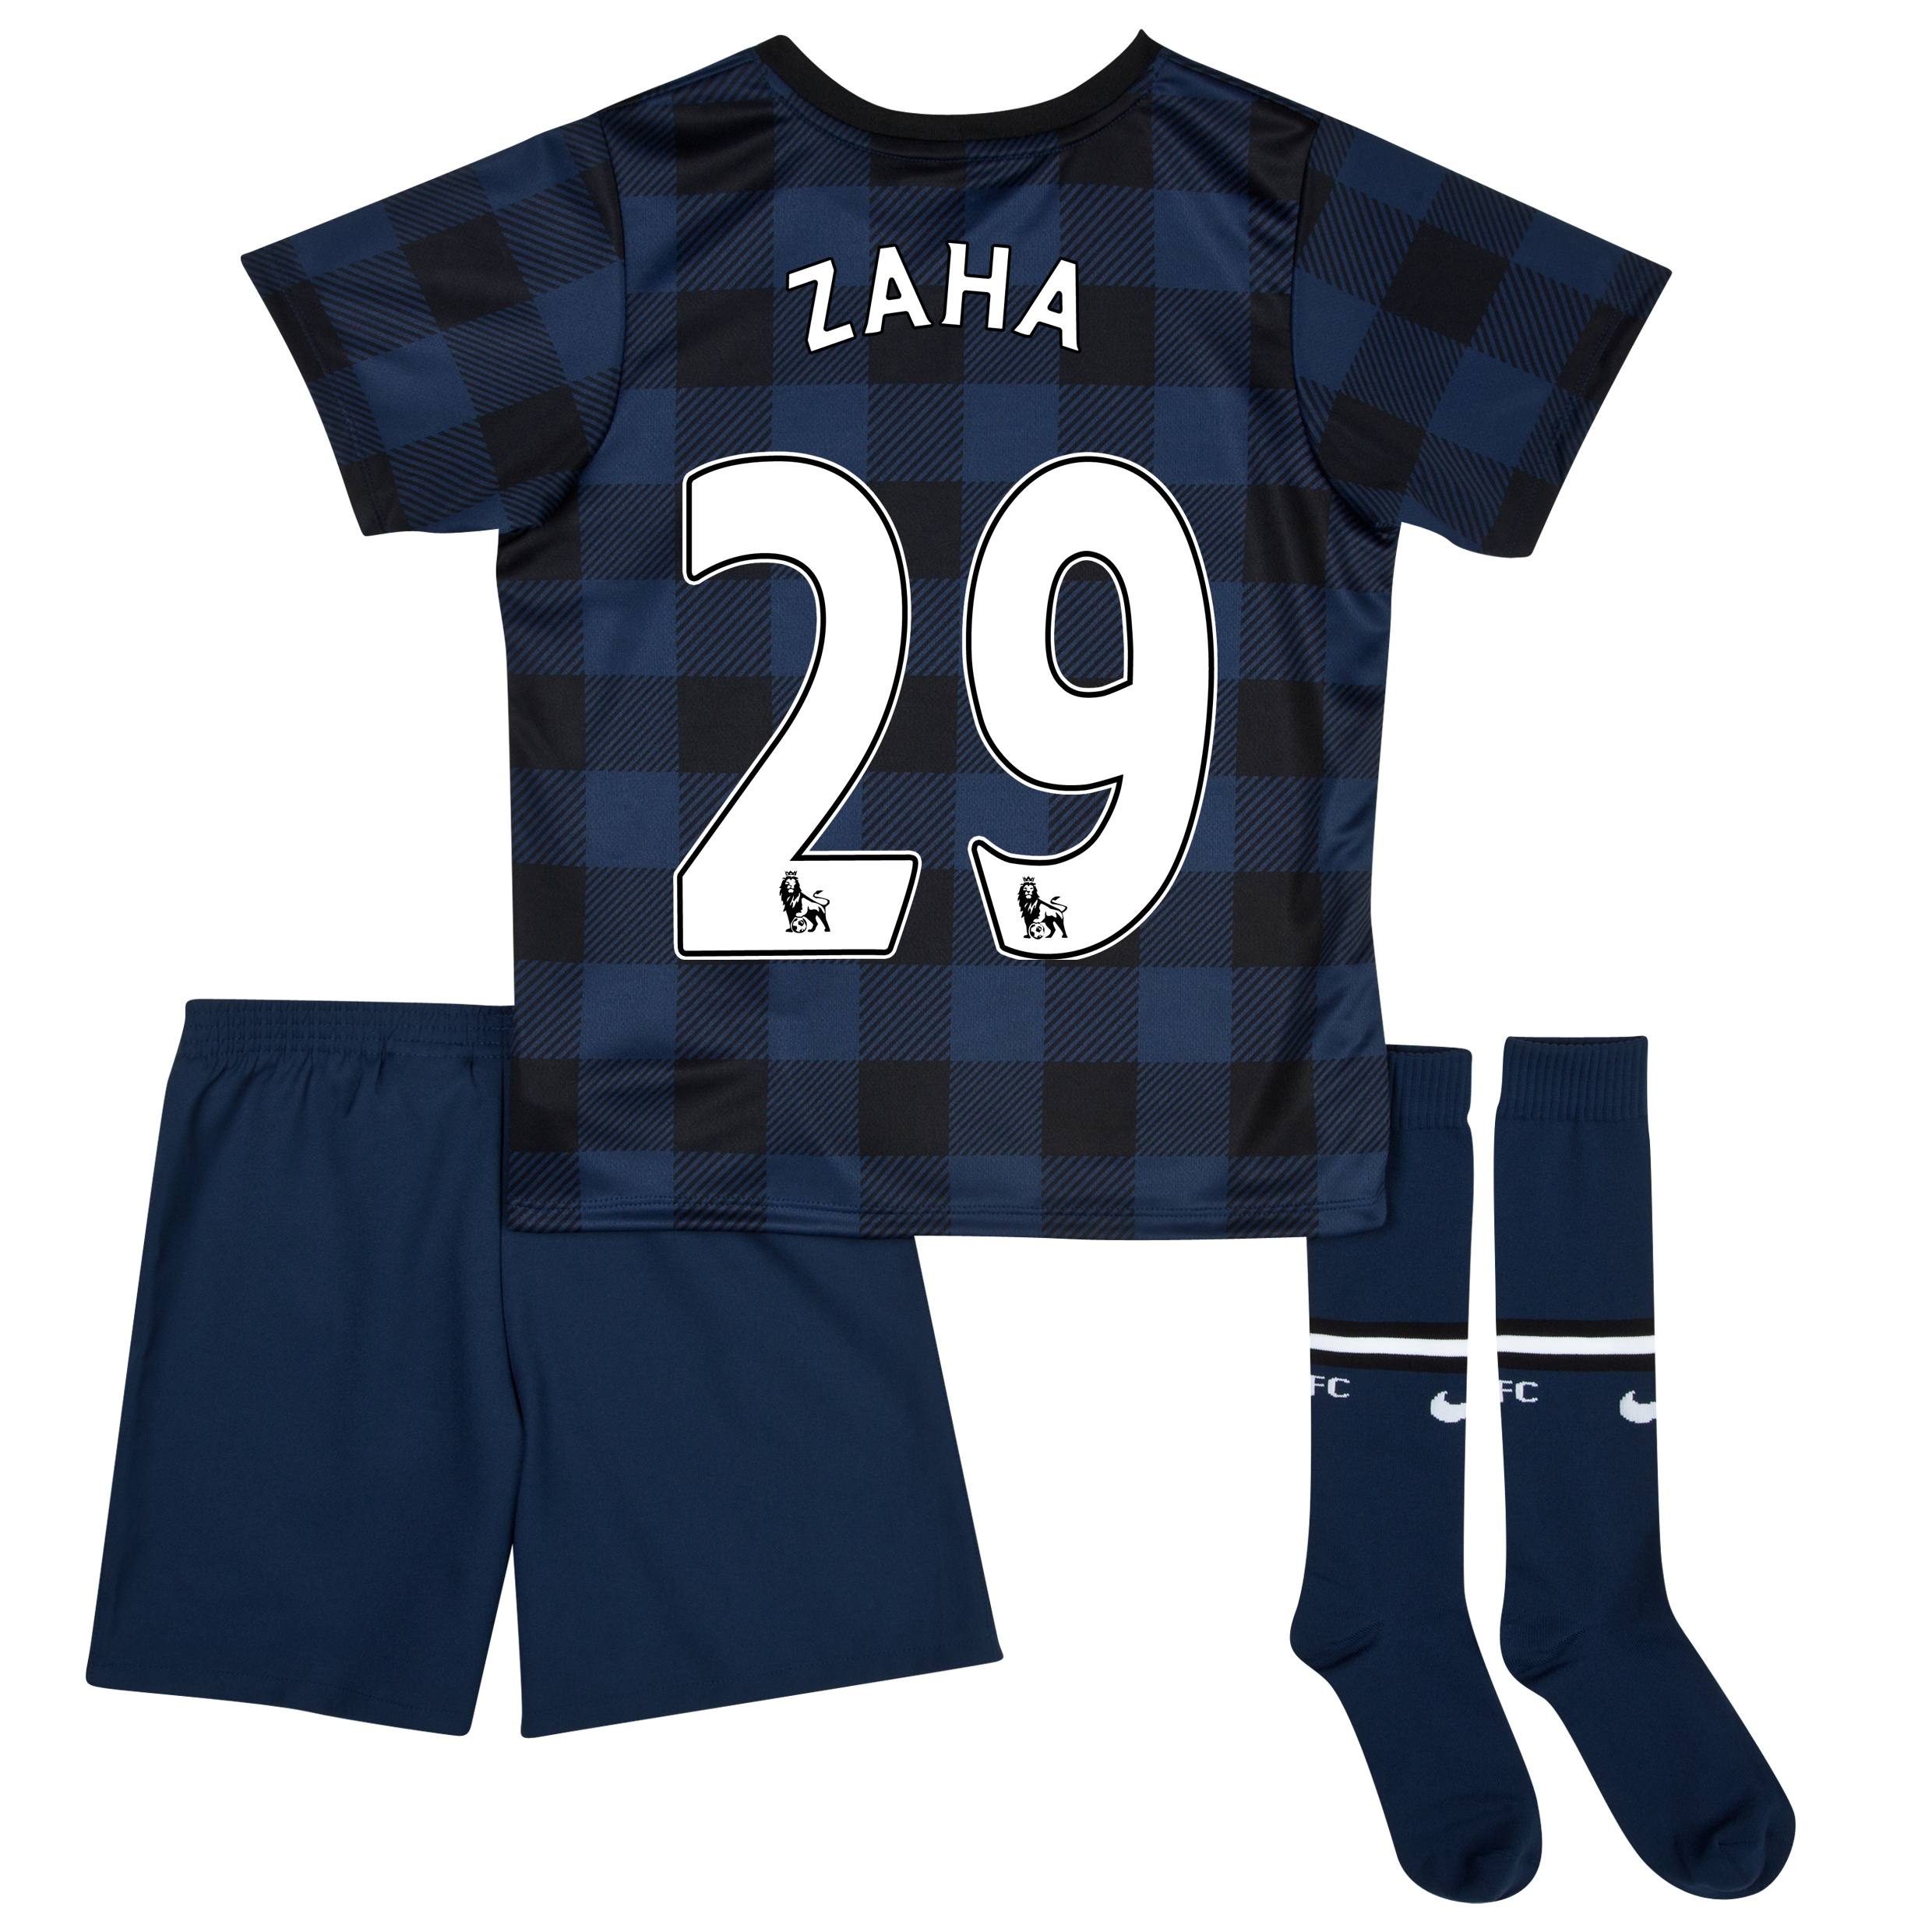 Manchester United Away Kit 2013/14 - Little Boys with Zaha 29 printing